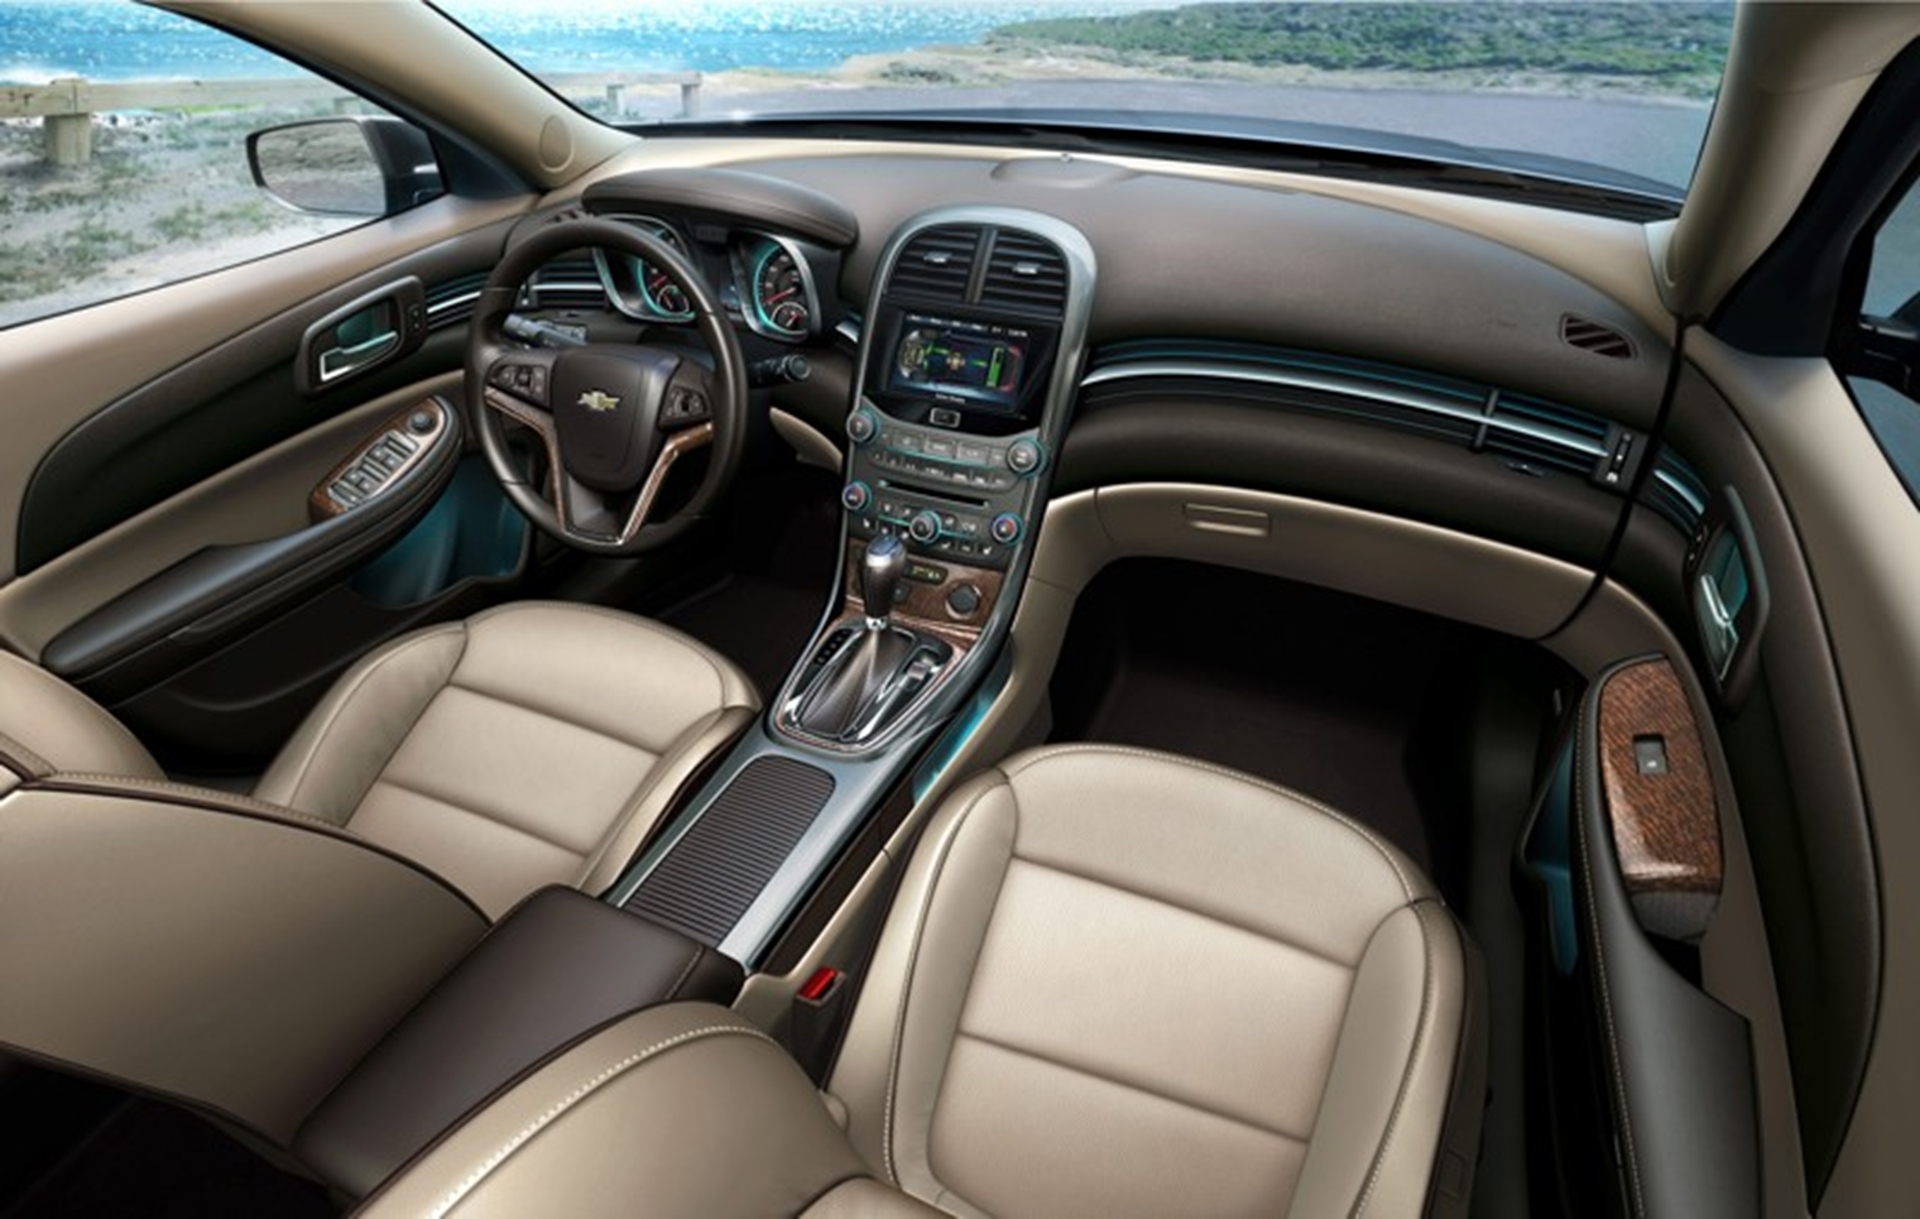 Chevrolet Malibu Interior Delivers a Touch of Luxury